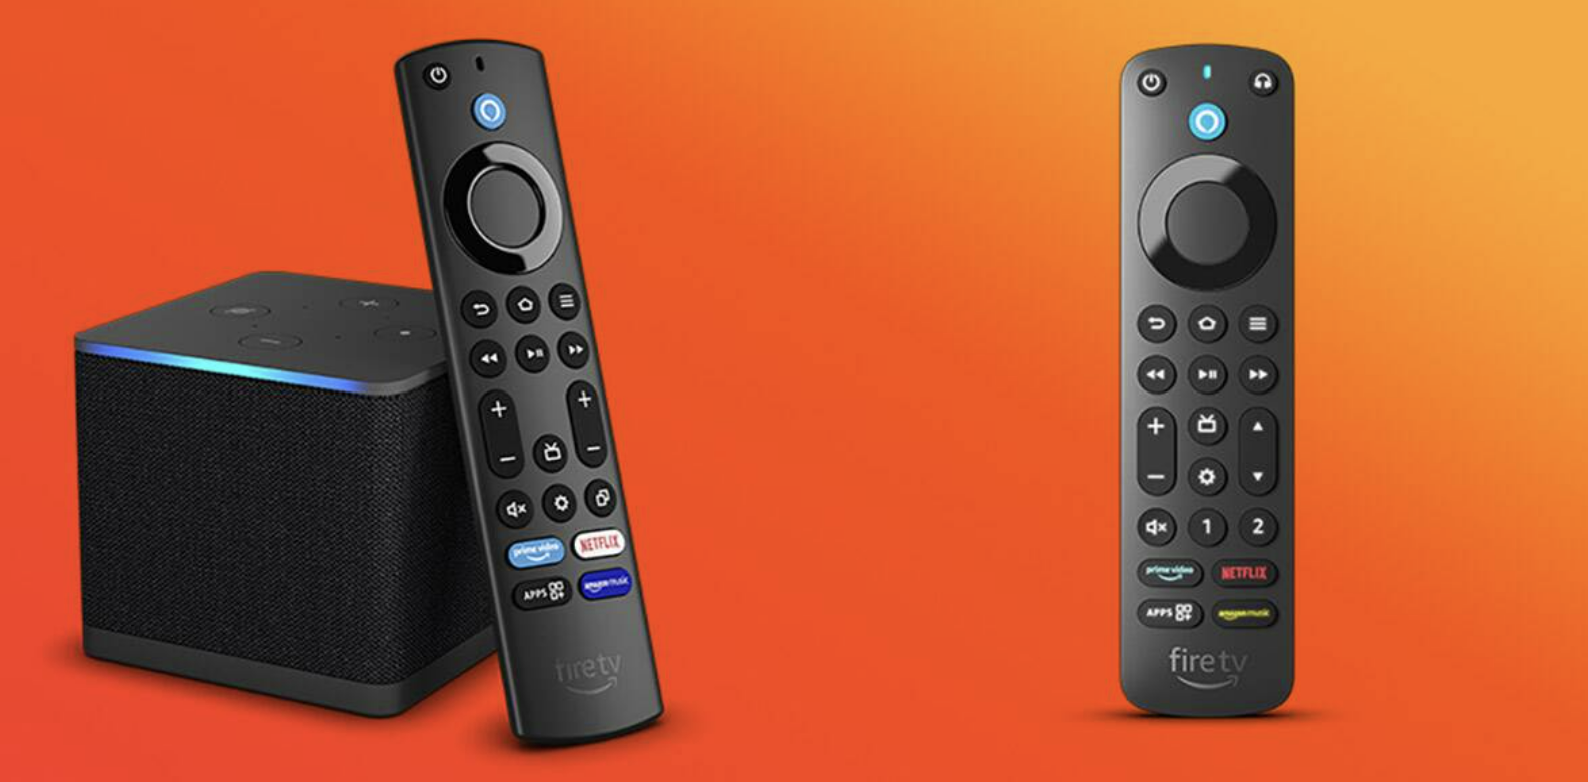 Amazon’s Third Gen Fire TV Cube & Alexa Remote Launched